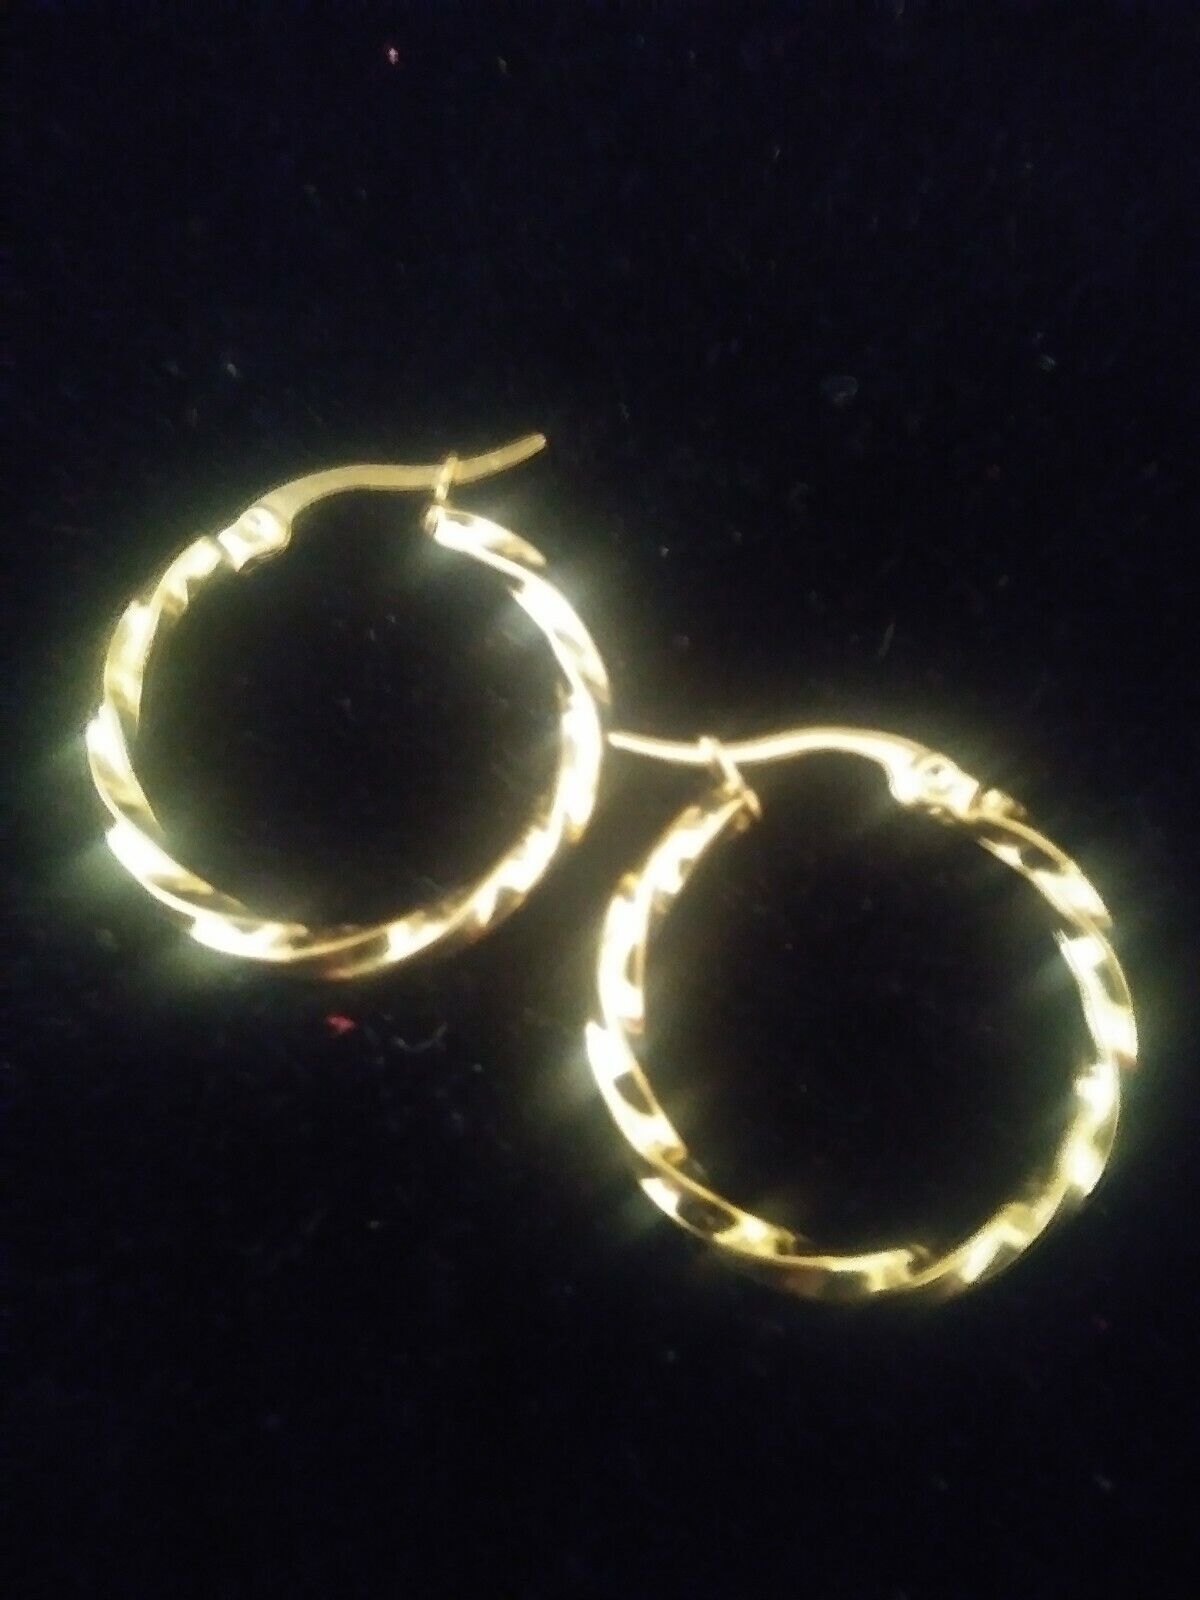 1 INCH  14KT GOLD & STS TWISTED SHINY ROUND HOOP EARRINGS + BONUS!  SPECIAL! EXCEPTIONALBUY